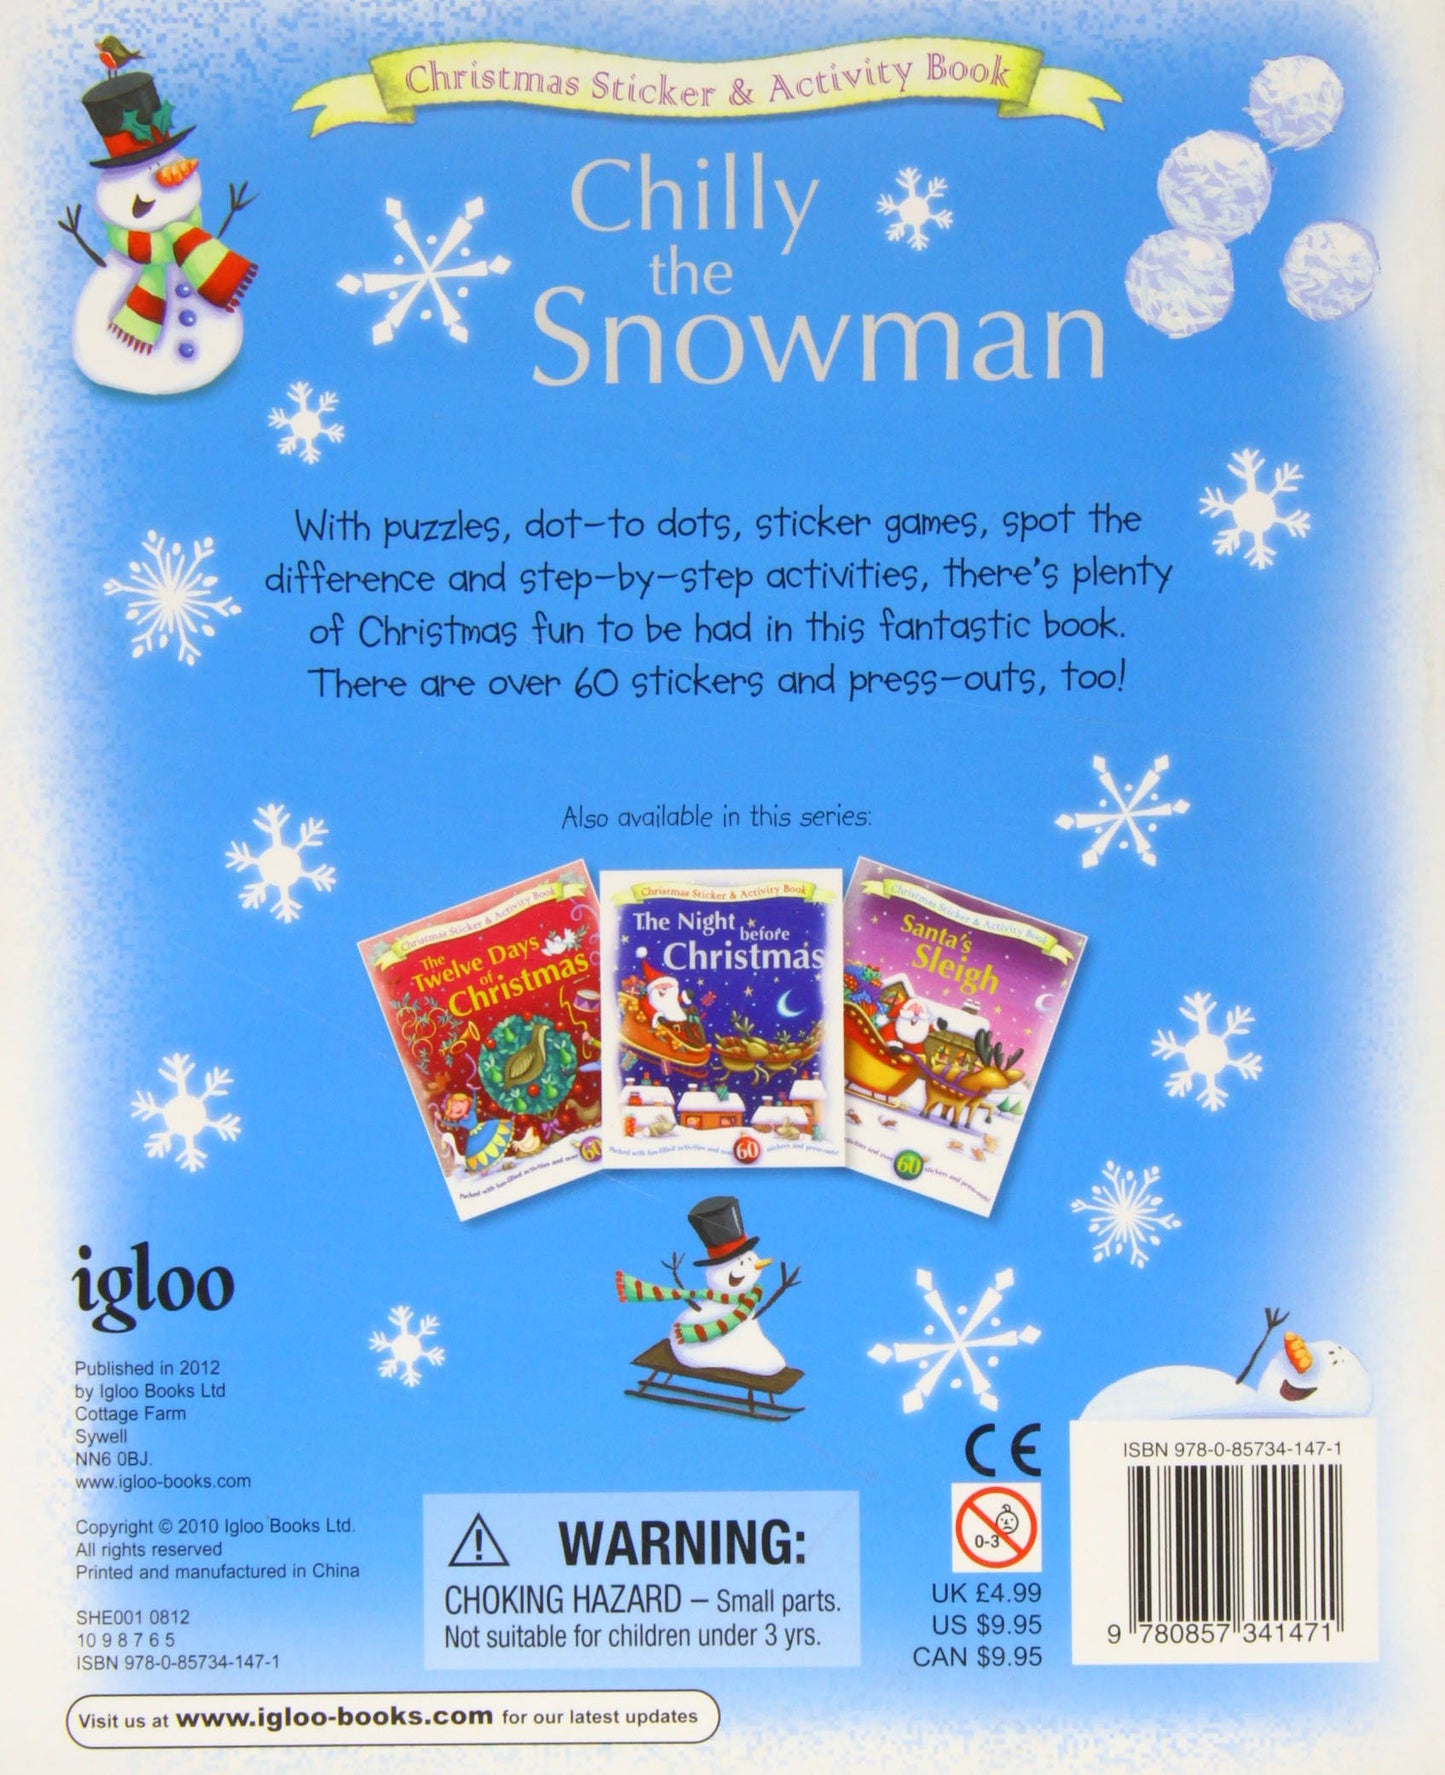 Chilly the Snowman Sticker & Activity Book